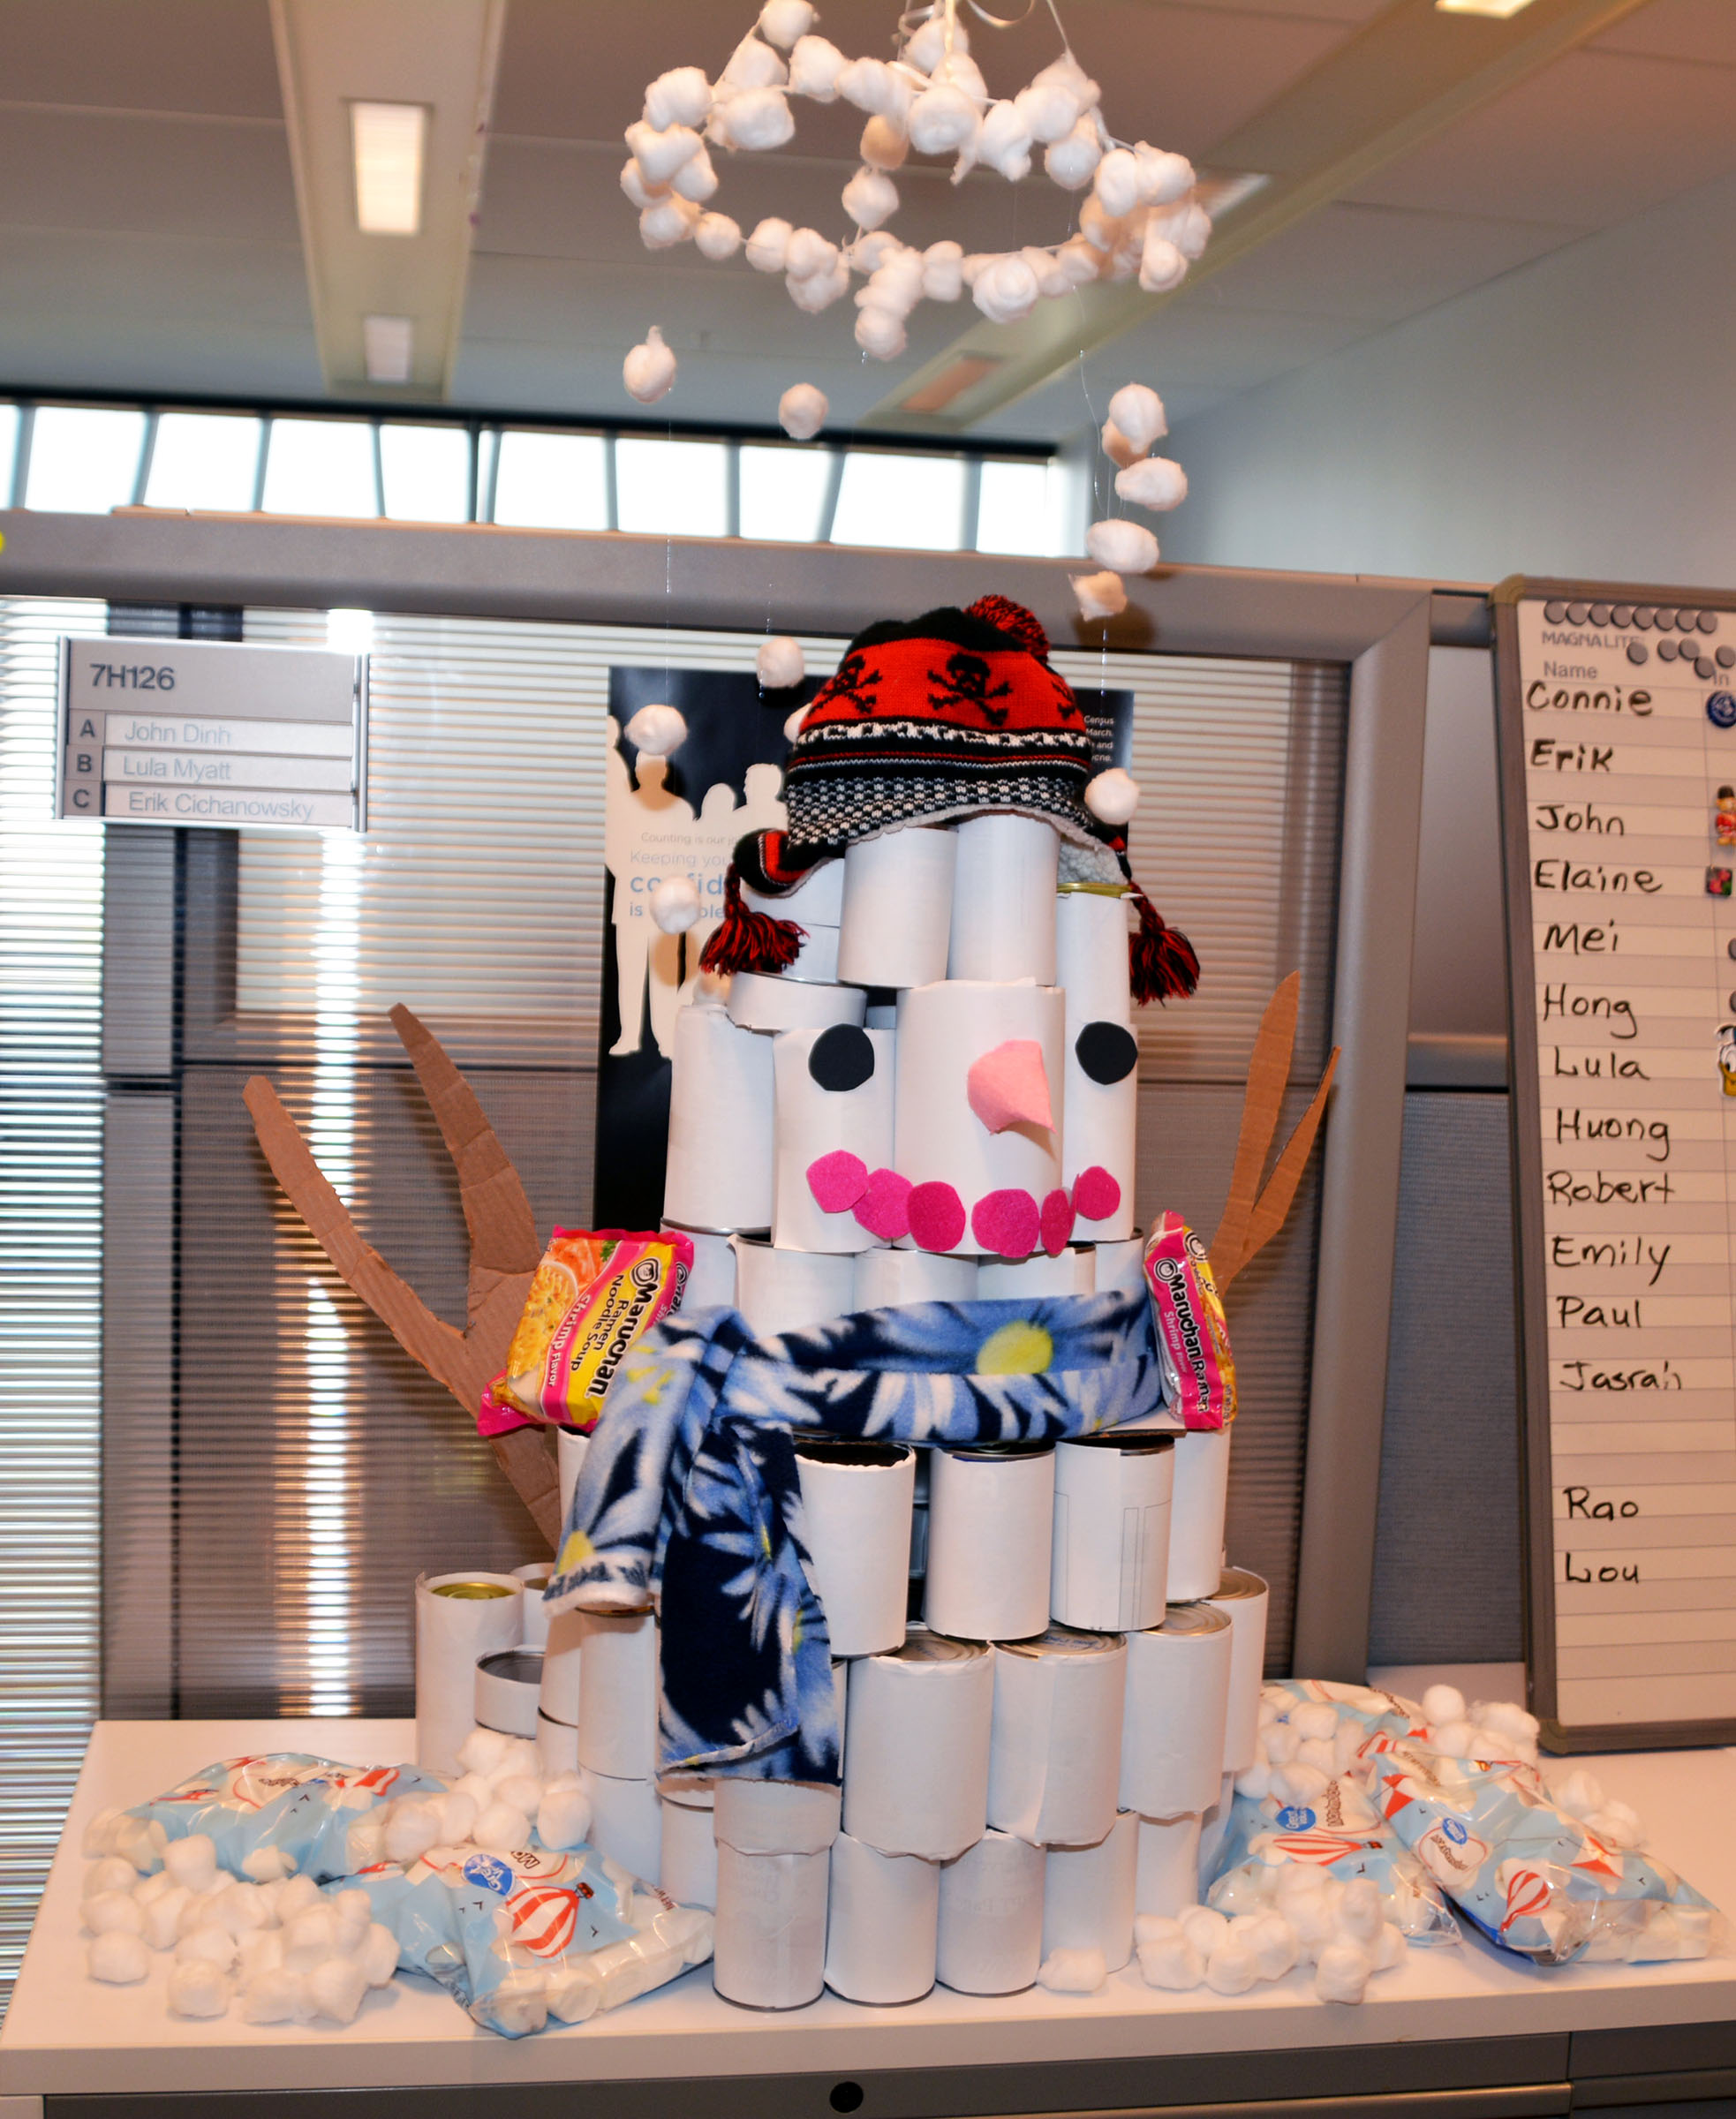 A tower of cans decorated like a snowman for the 2019 CFC CANstruction Food Drive at the Census Bureau